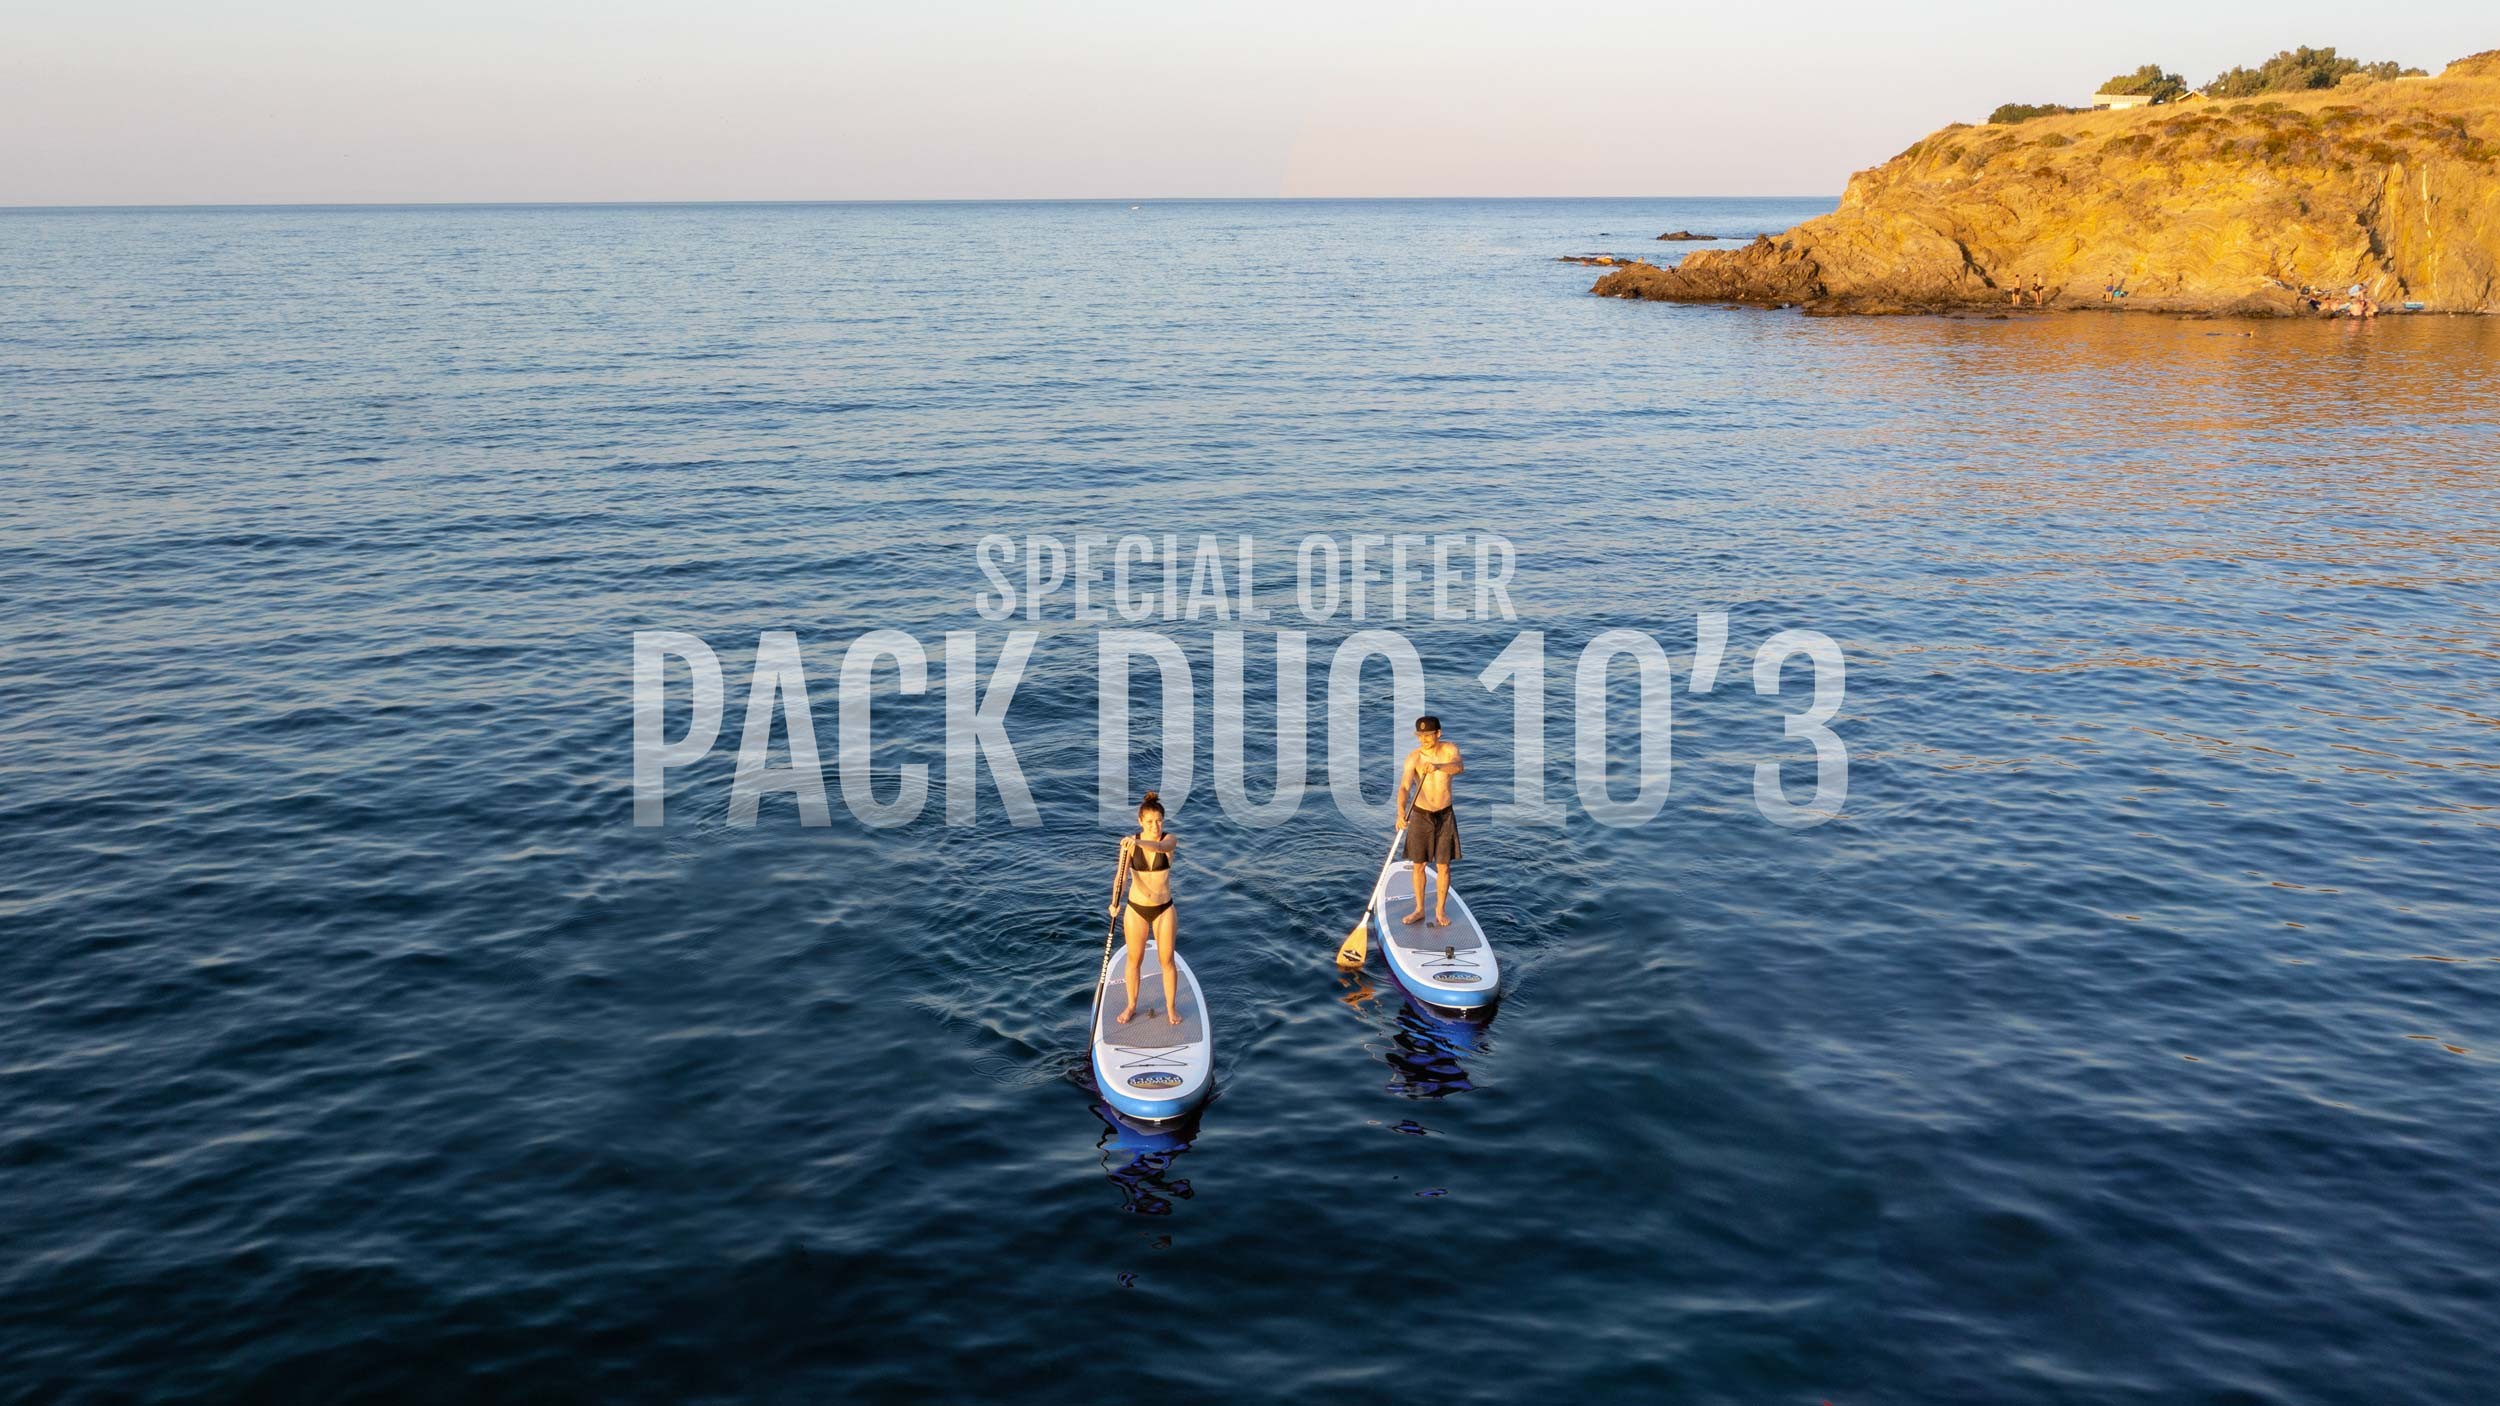 Duo Pack offer